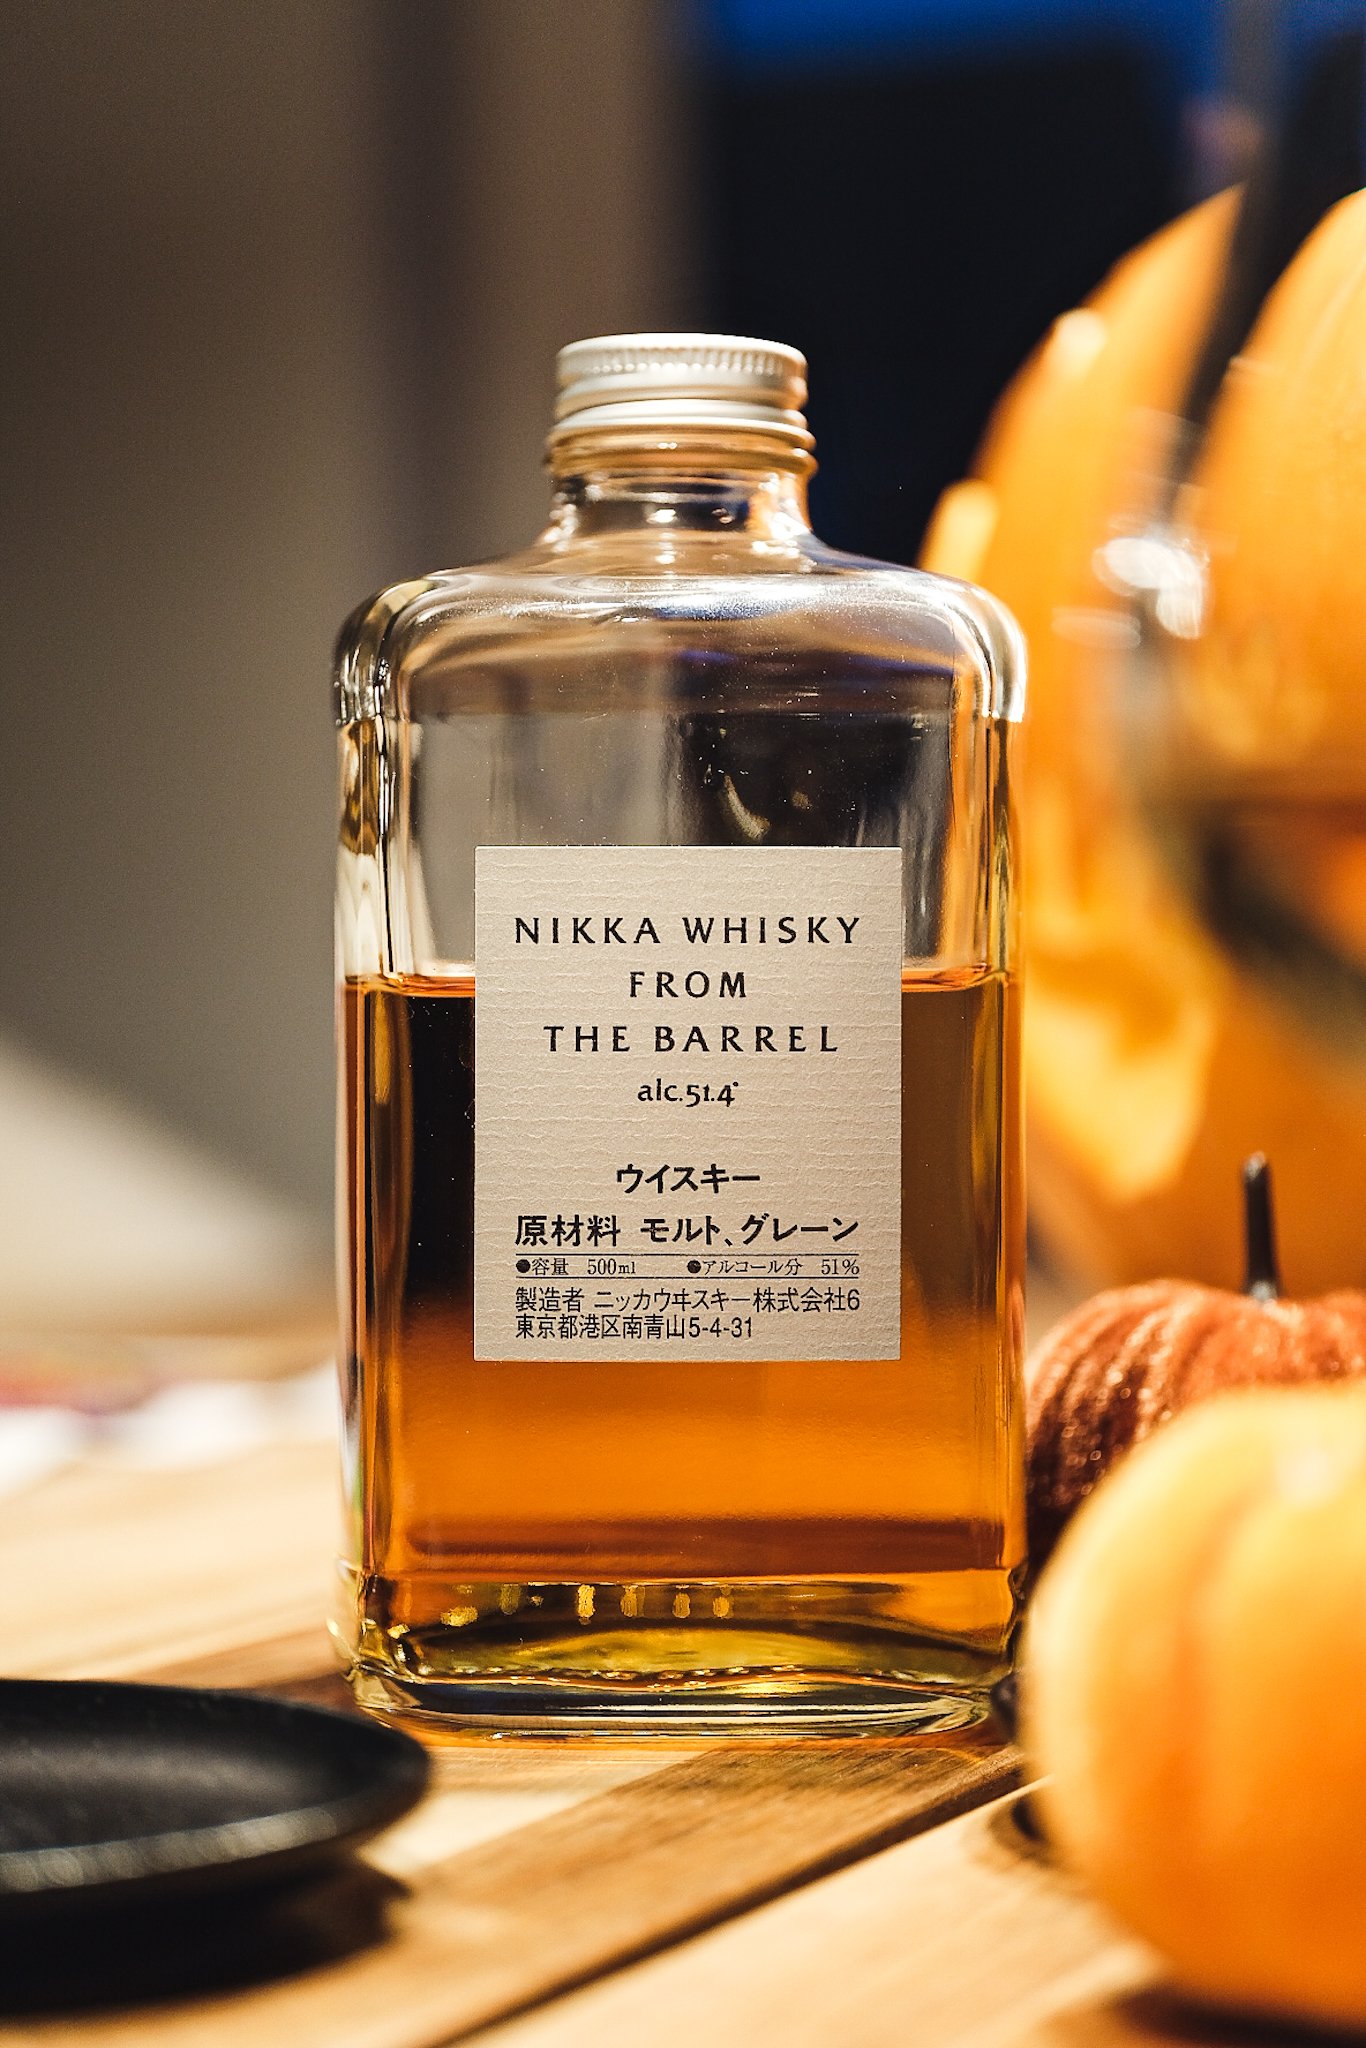 BUY] Nikka From The Barrel Japanese Whisky at